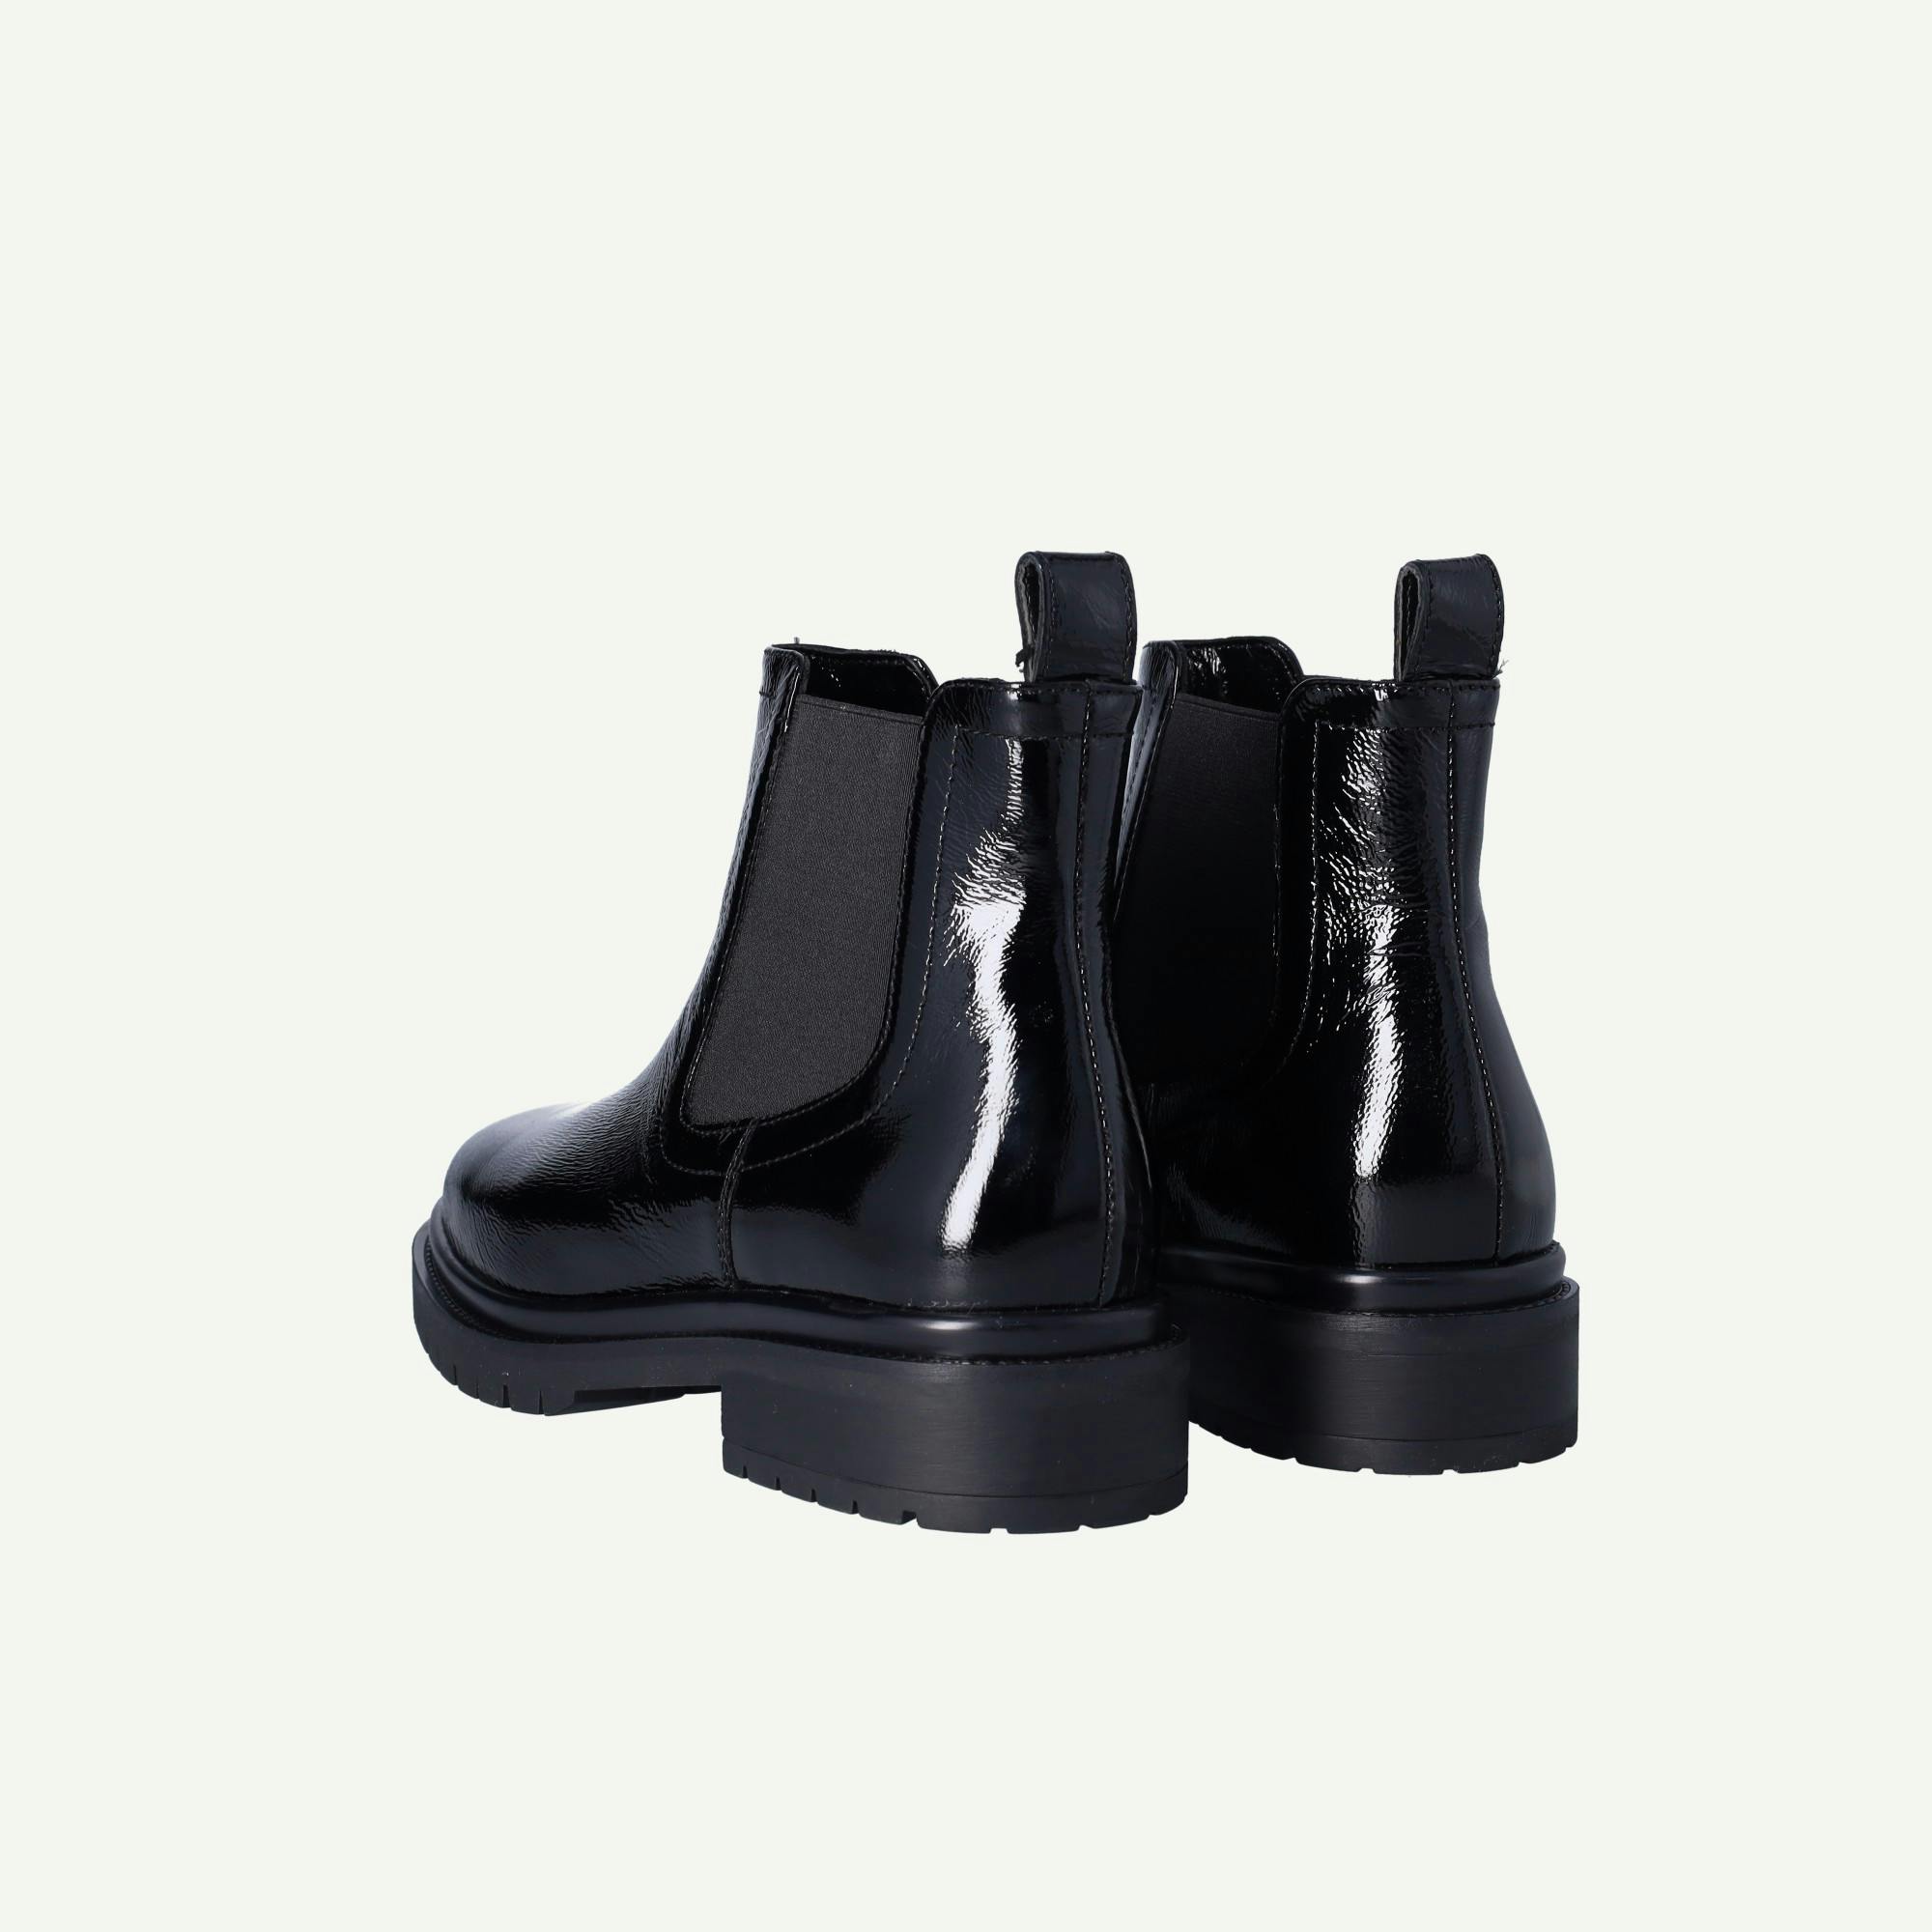 Dune London Perceive Boots image 17